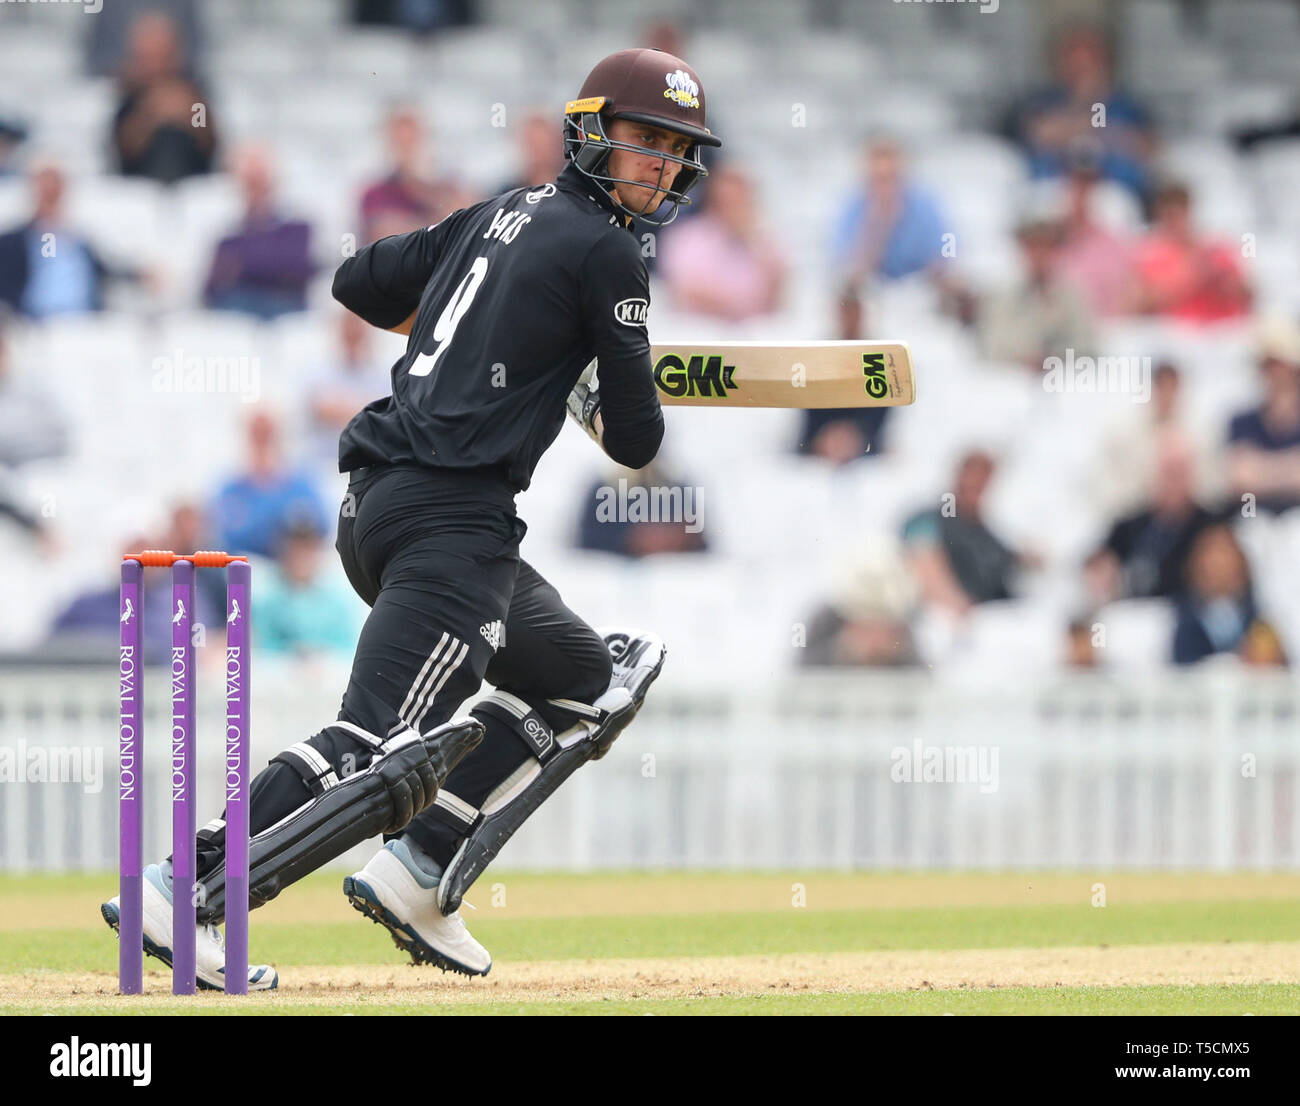 LONDON, UK. 23 April 2019: Will Jacks of of Surrey plays a shot during the Surrey v Essex, Royal London One Day Cup match at The Kia Oval. Credit: Mitchell Gunn/ESPA-Images Stock Photo